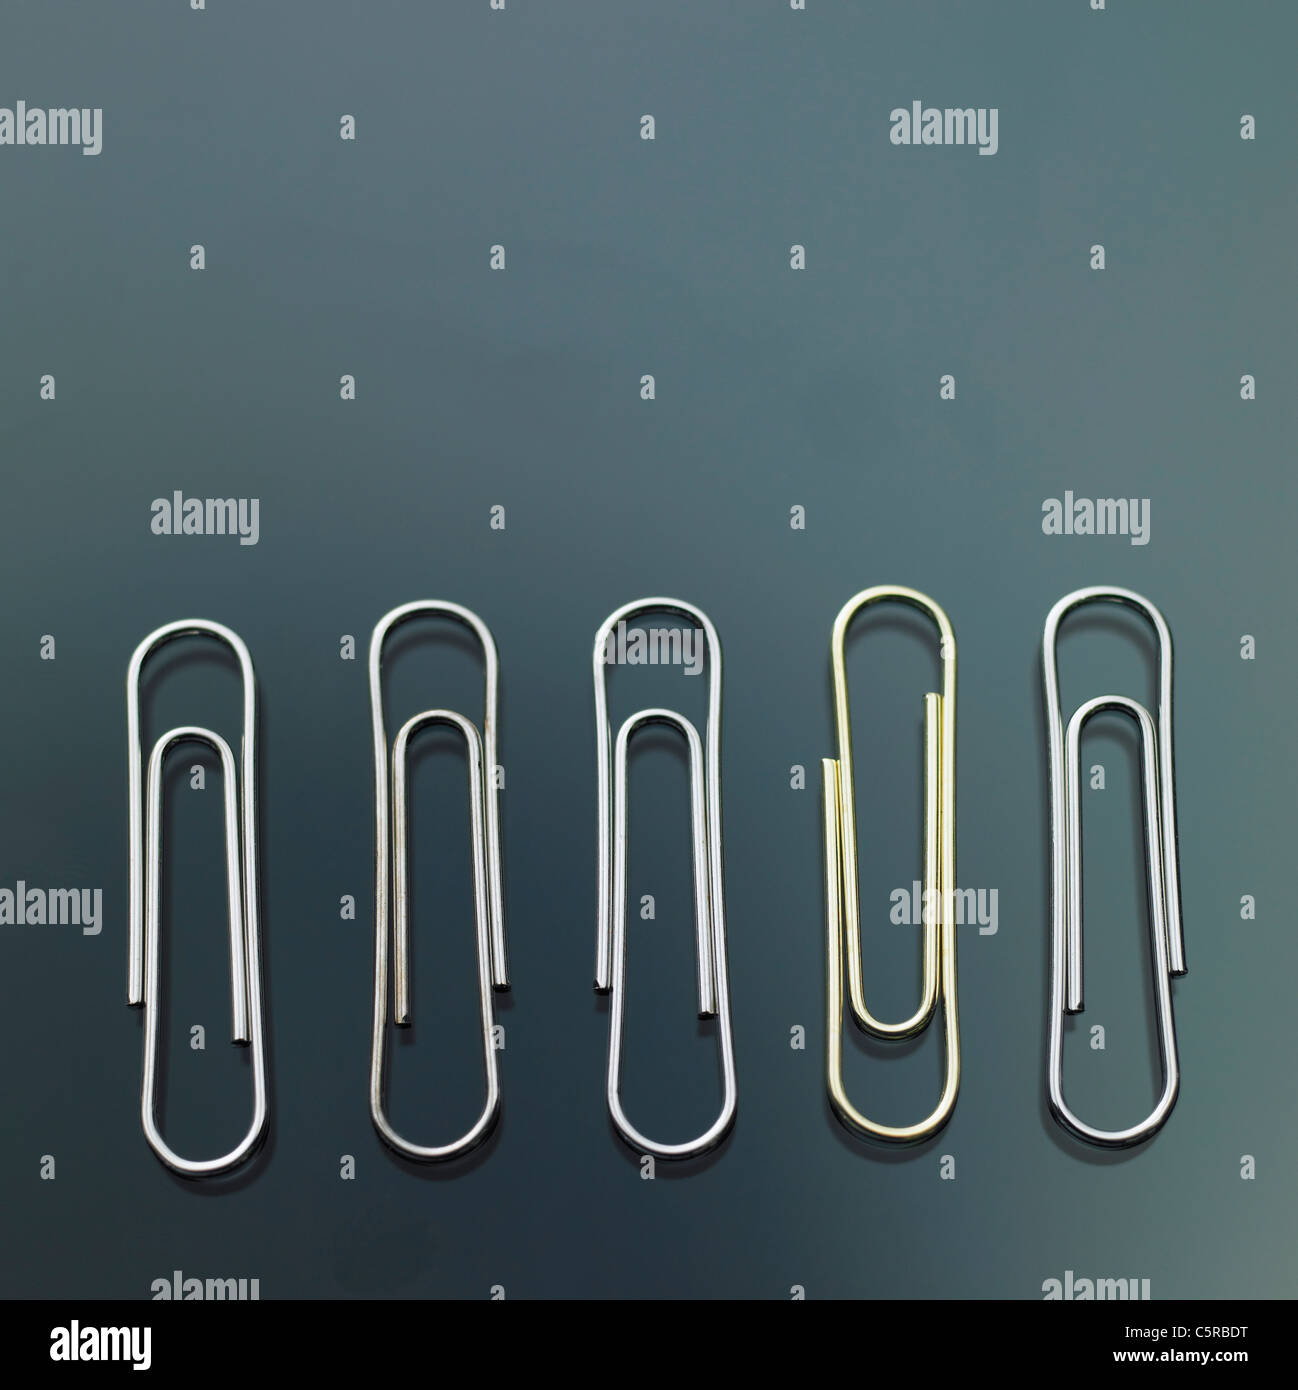 Paper clips in a row Stock Photo